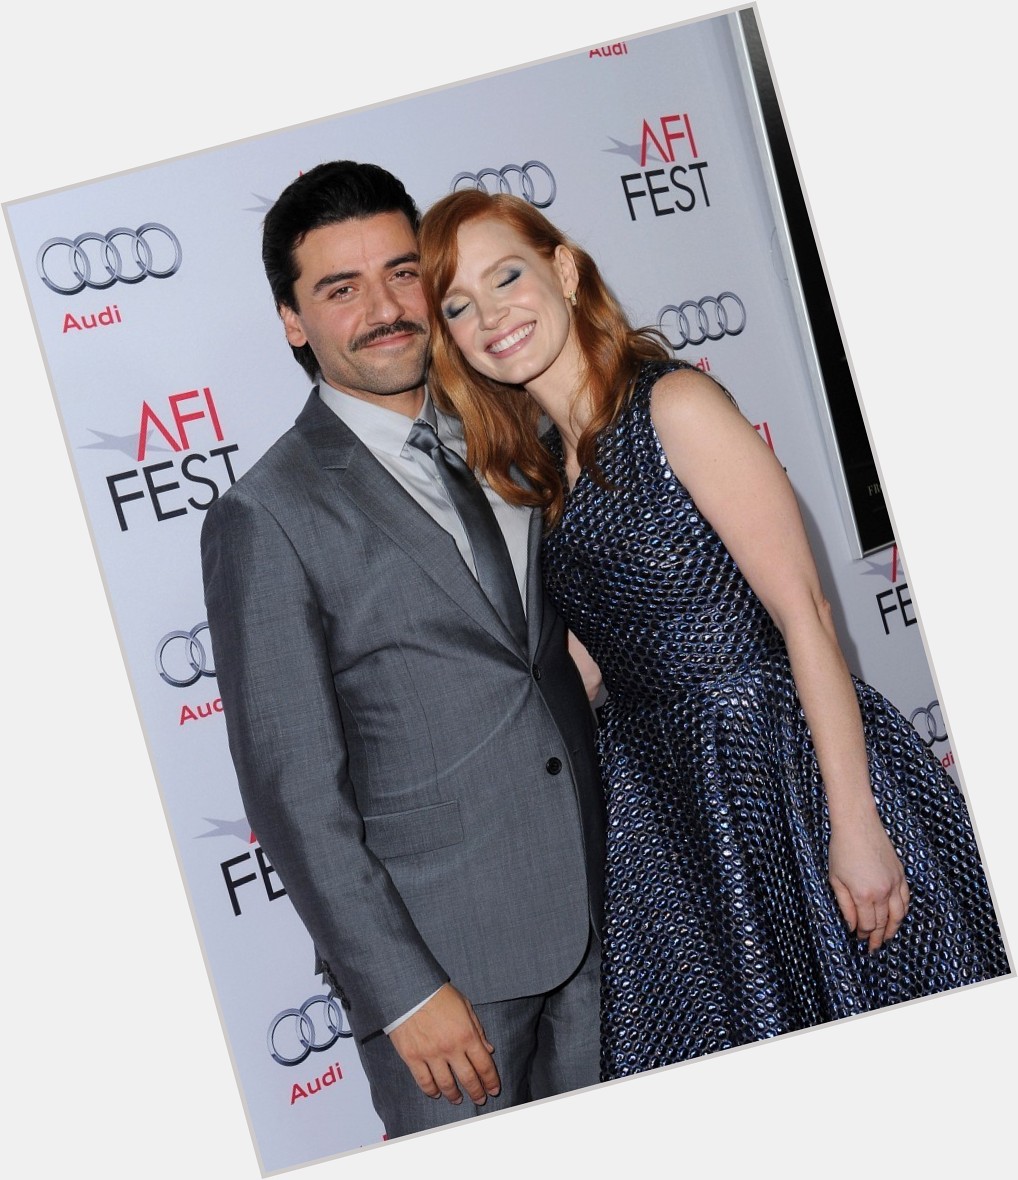 Jessica Chastain and Oscar Isaac are always the cutest together. Happy birthday Oscar <3 